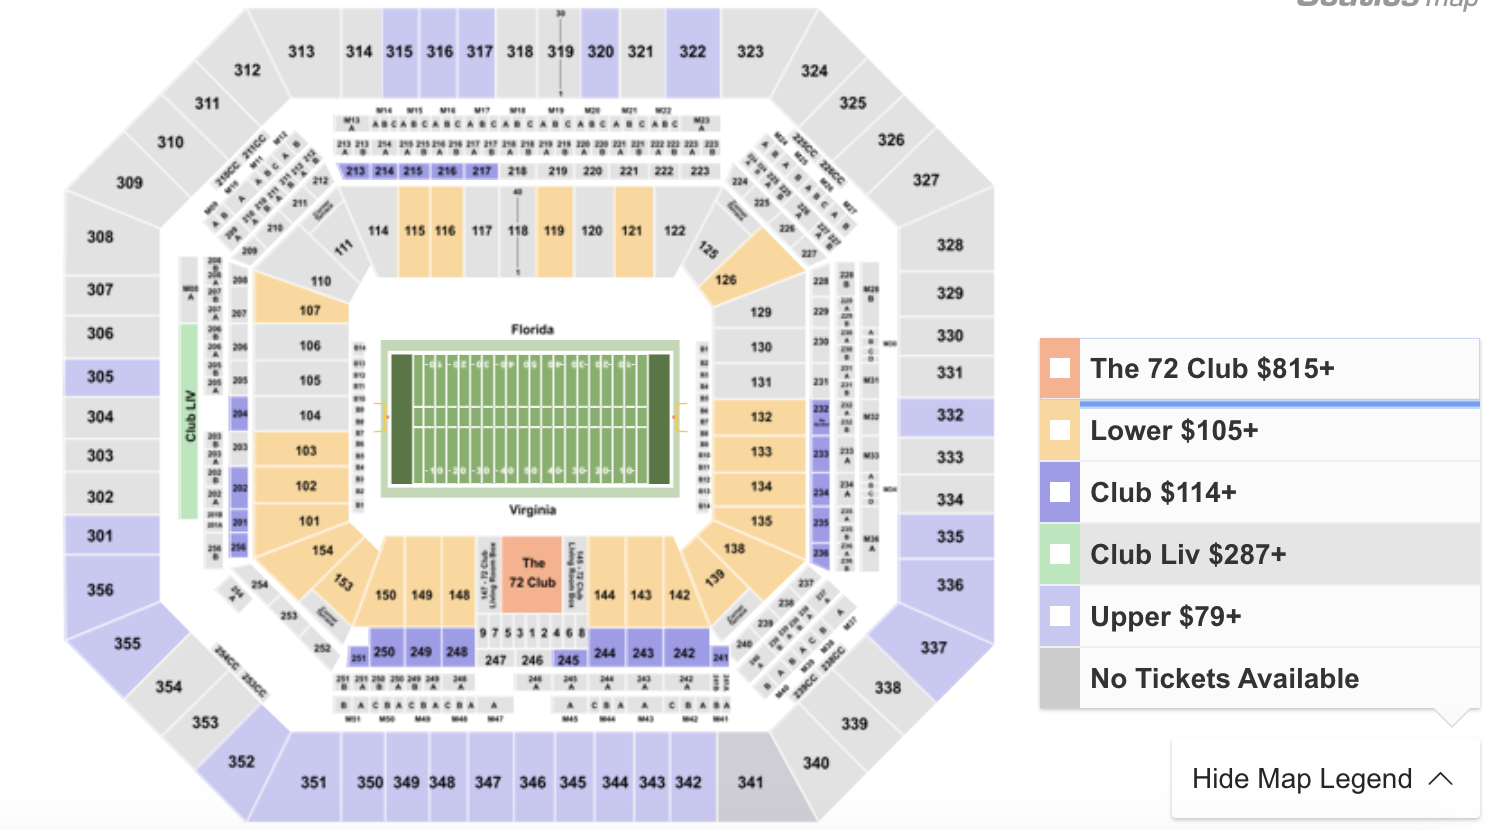 How To Find The Cheapest Orange Bowl Tickets (Florida vs Virginia)